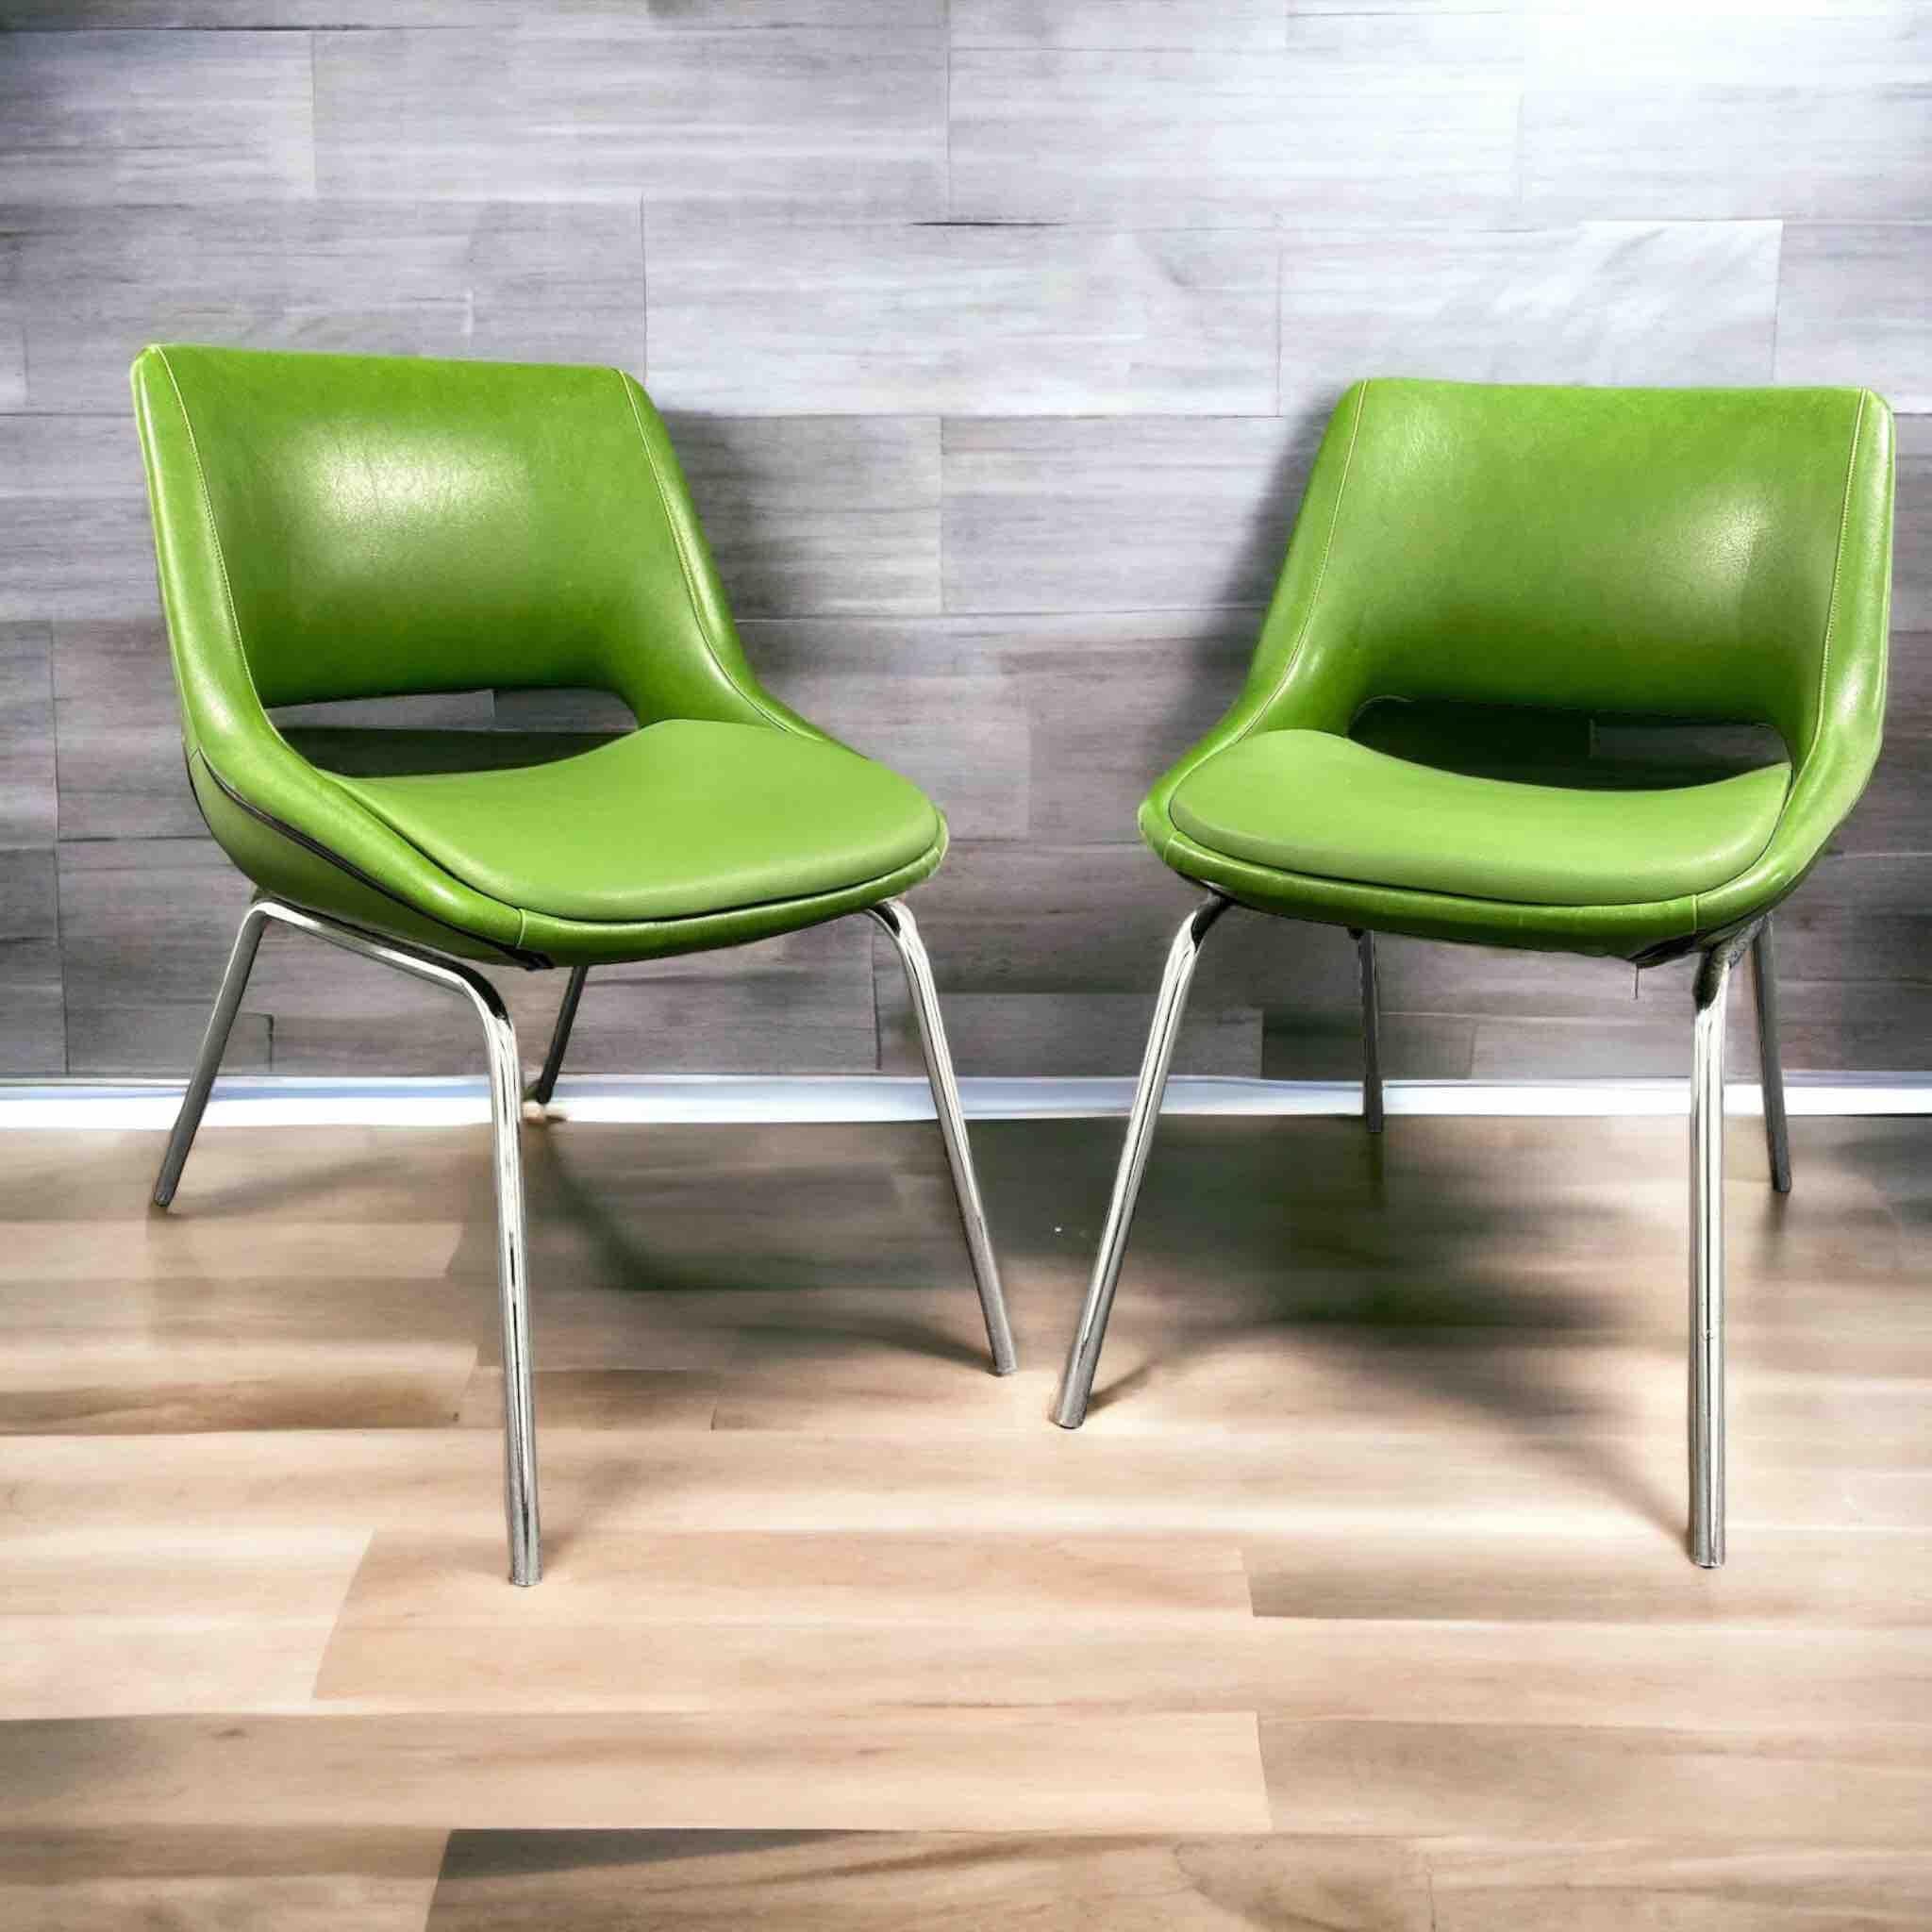 Mid-Century Modern Two Chrome Base, Green Faux Leather Chairs Made by Blaha, Austria, 1970s For Sale